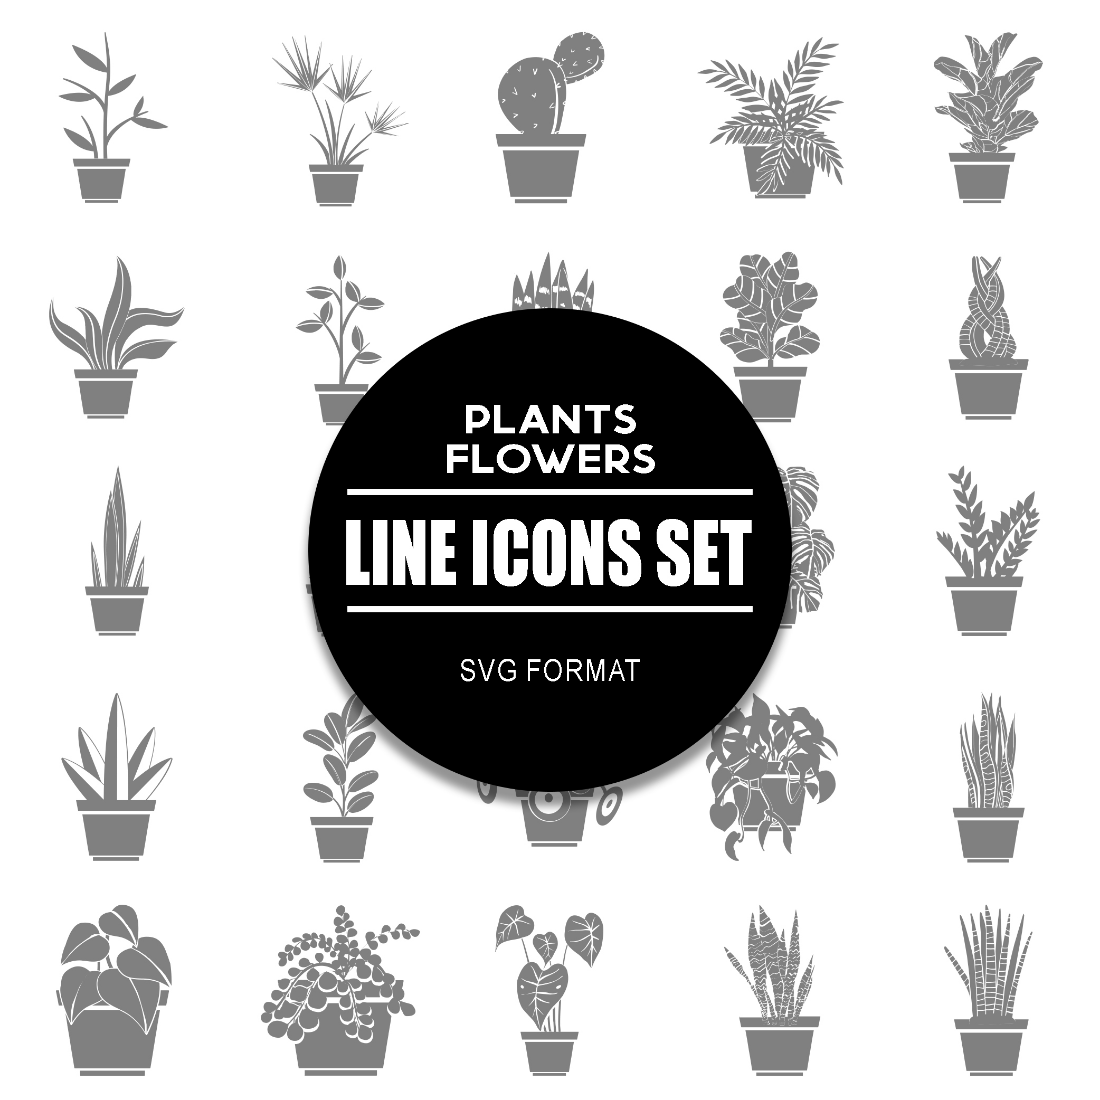 Plants and Flowers Icon Set cover image.